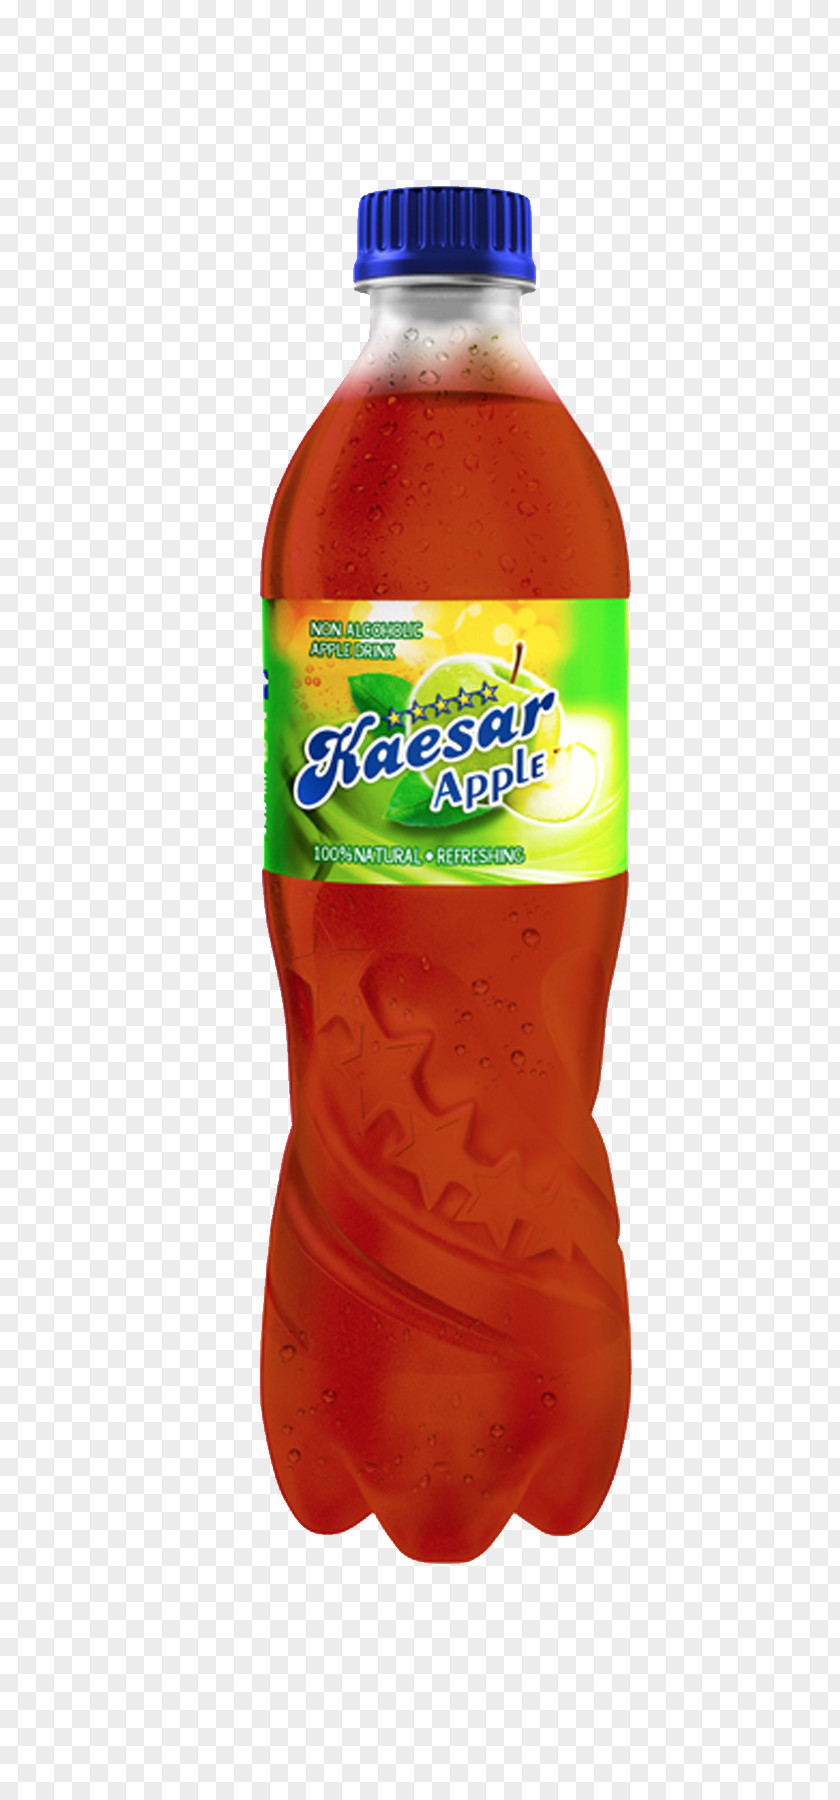 Cold Drink Bottle Fizzy Drinks Apple Juice Coffee Energy PNG